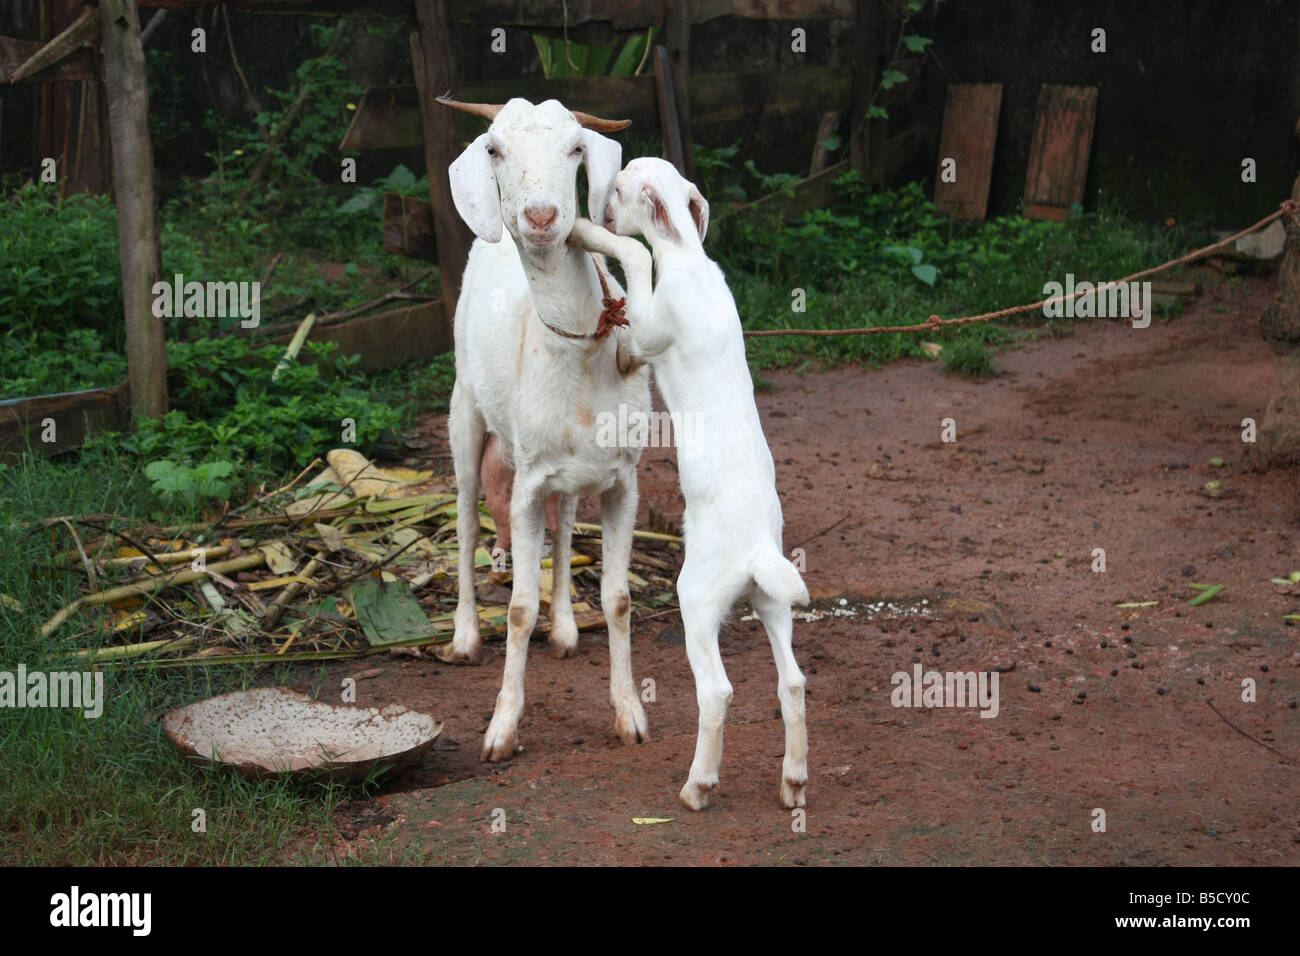 A mother goat with child Stock Photo